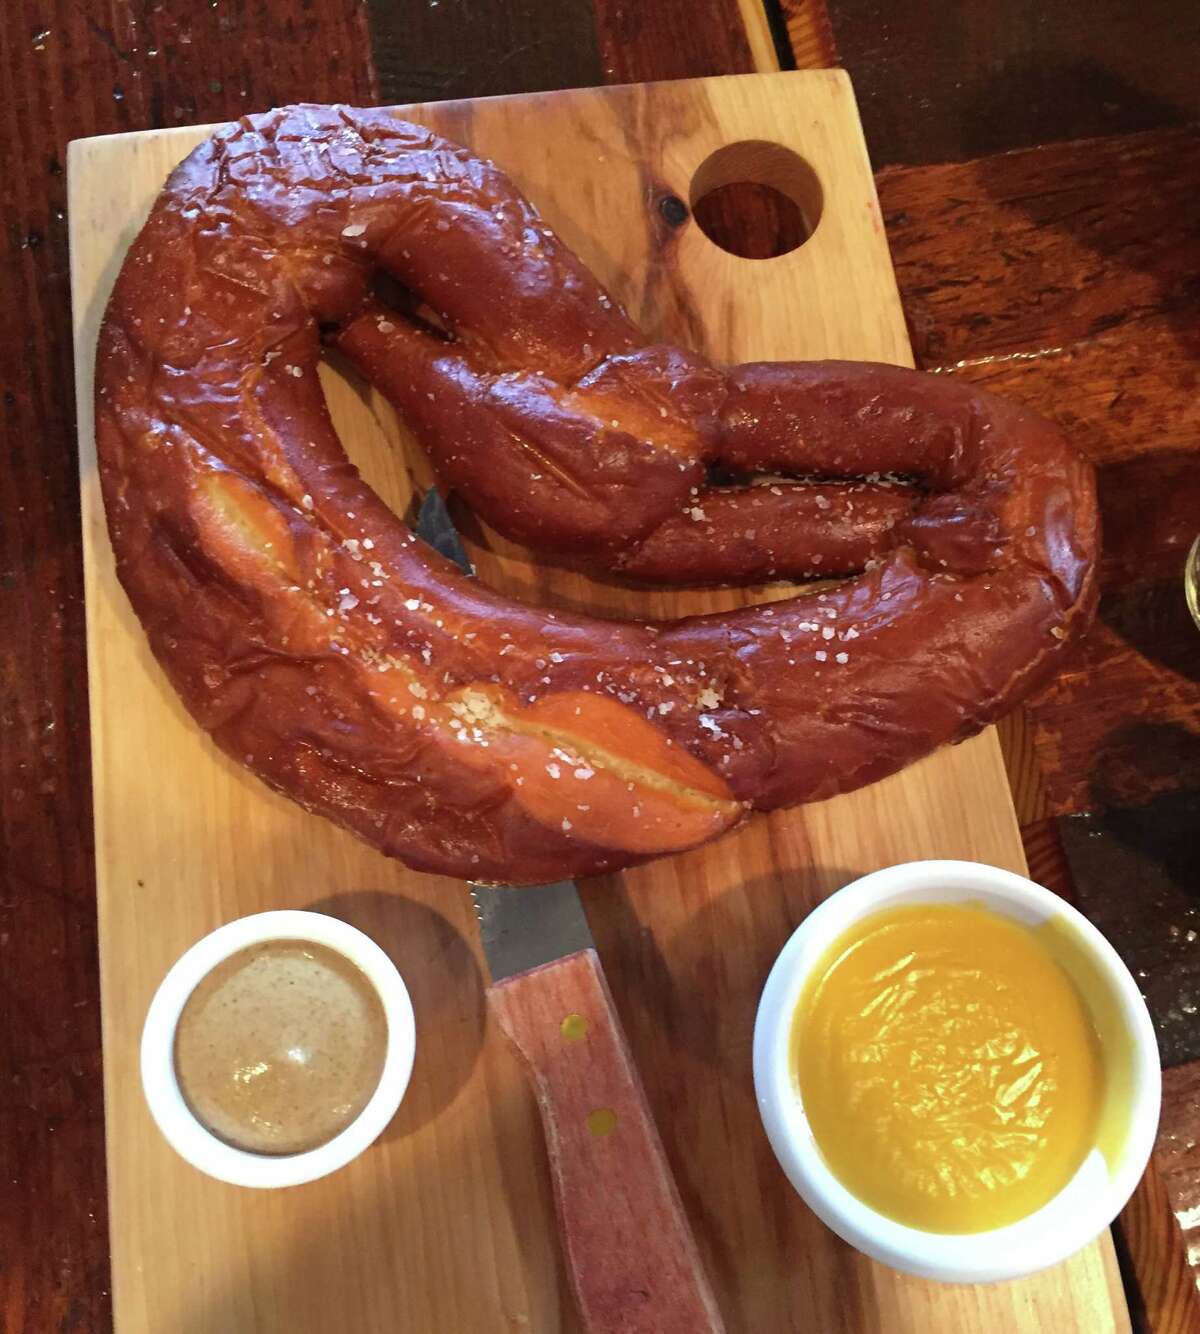 Giant Pretzel with schwarzbier cheese and IPA mustard at Frank.